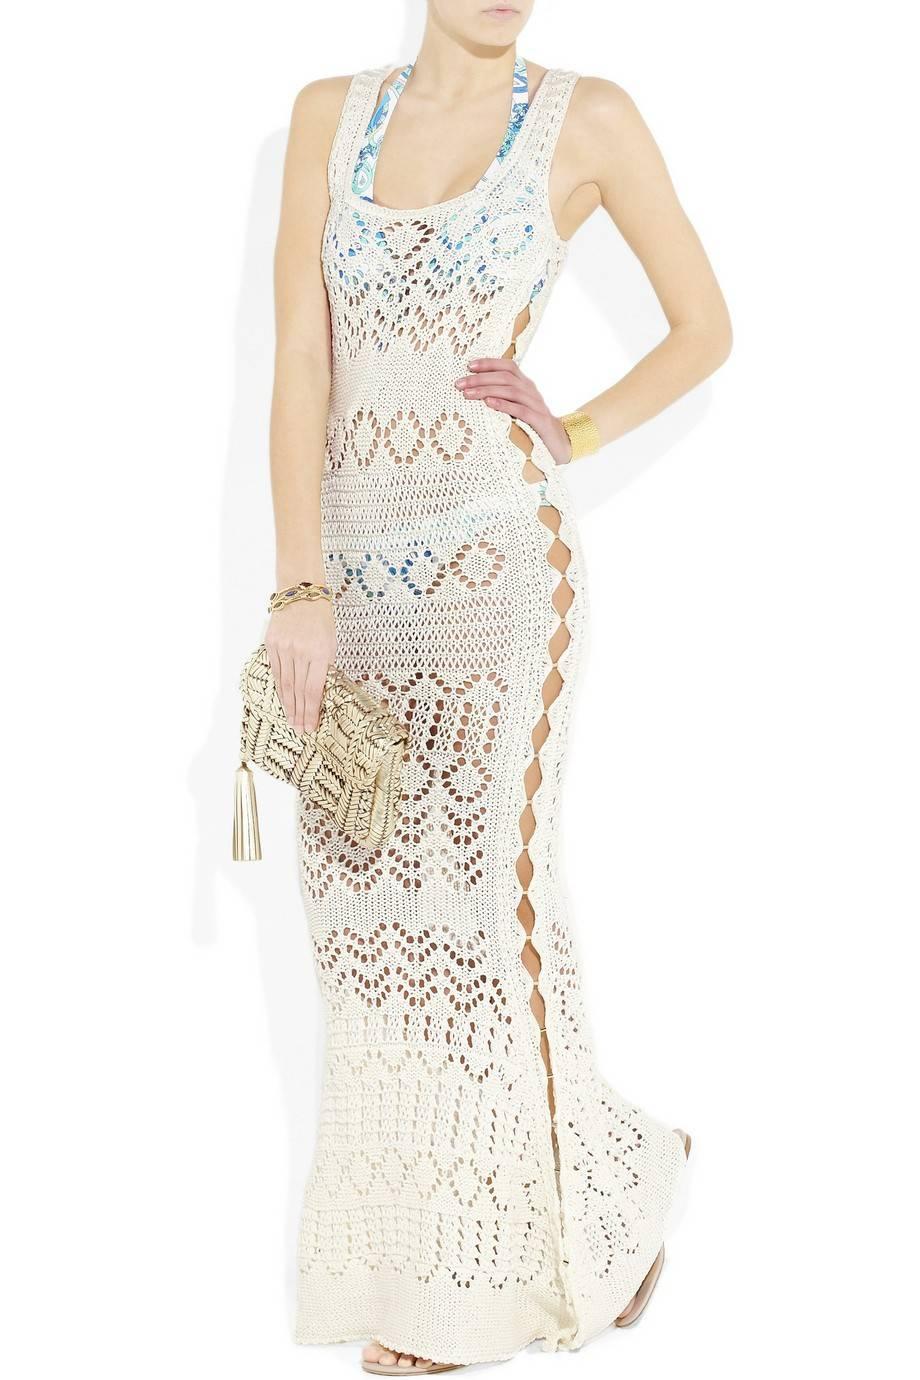 Absolutely Insane Emilio Pucci White Crochet Knit Cutout Gown  
Designed By Peter Dundas  
SS 2011 collection
Sold Out Immediately   

Details:
Exclusive and gorgeous EMILIO PUCCI crochet knit gown
Sexy cutout details
Sleeveless
Off-white